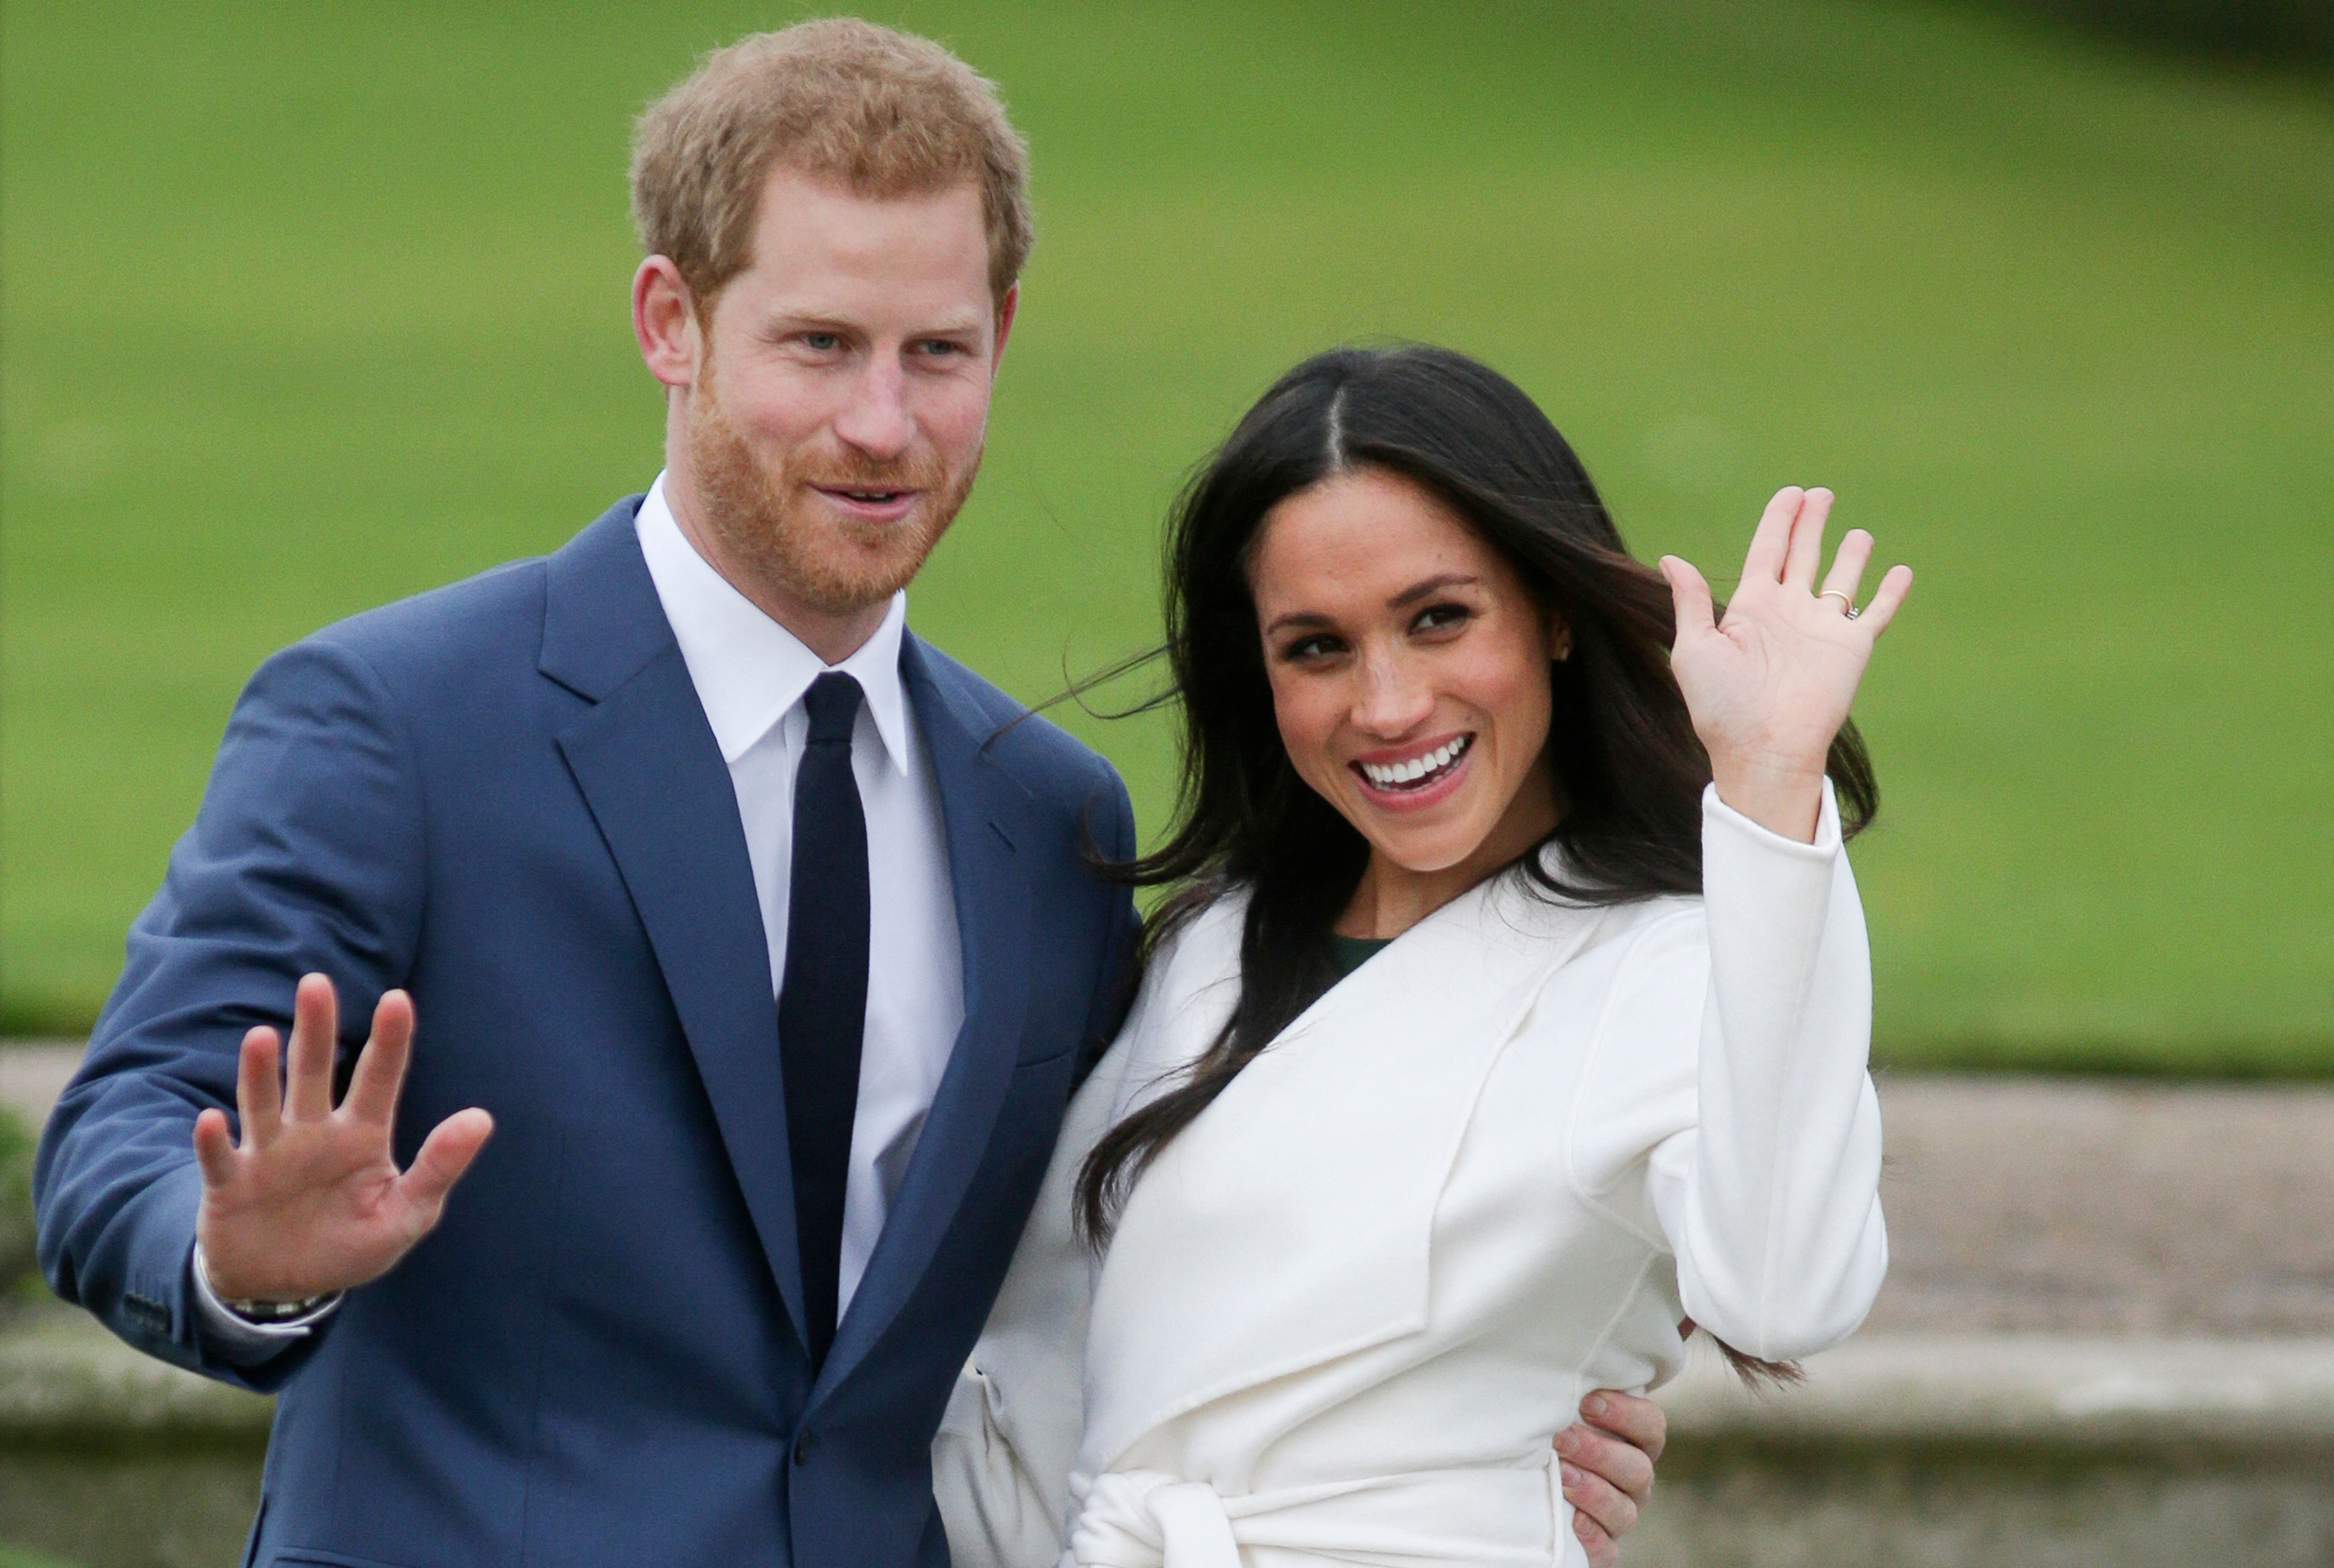 Britain's Prince Harry and his fiancée US actress Meghan Markle pose for a photograph in the Sunken Garden at Kensington Palace in west London on November 27, 2017, following the announcement of their engagement. | Source: Getty Images